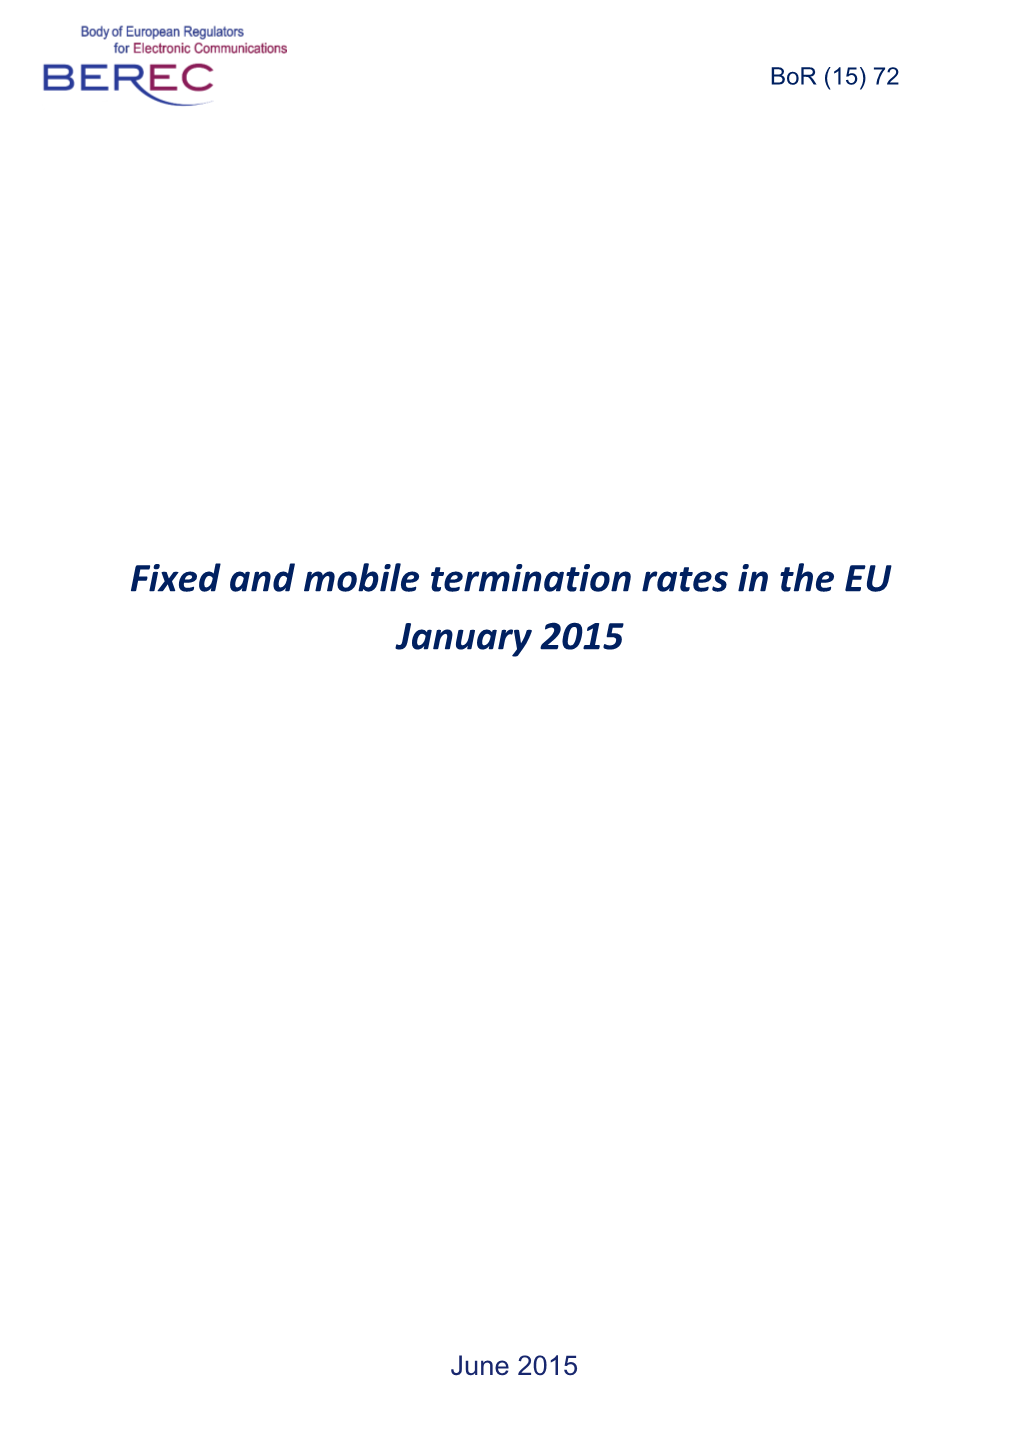 Fixed and Mobile Termination Rates in the EU January 2015